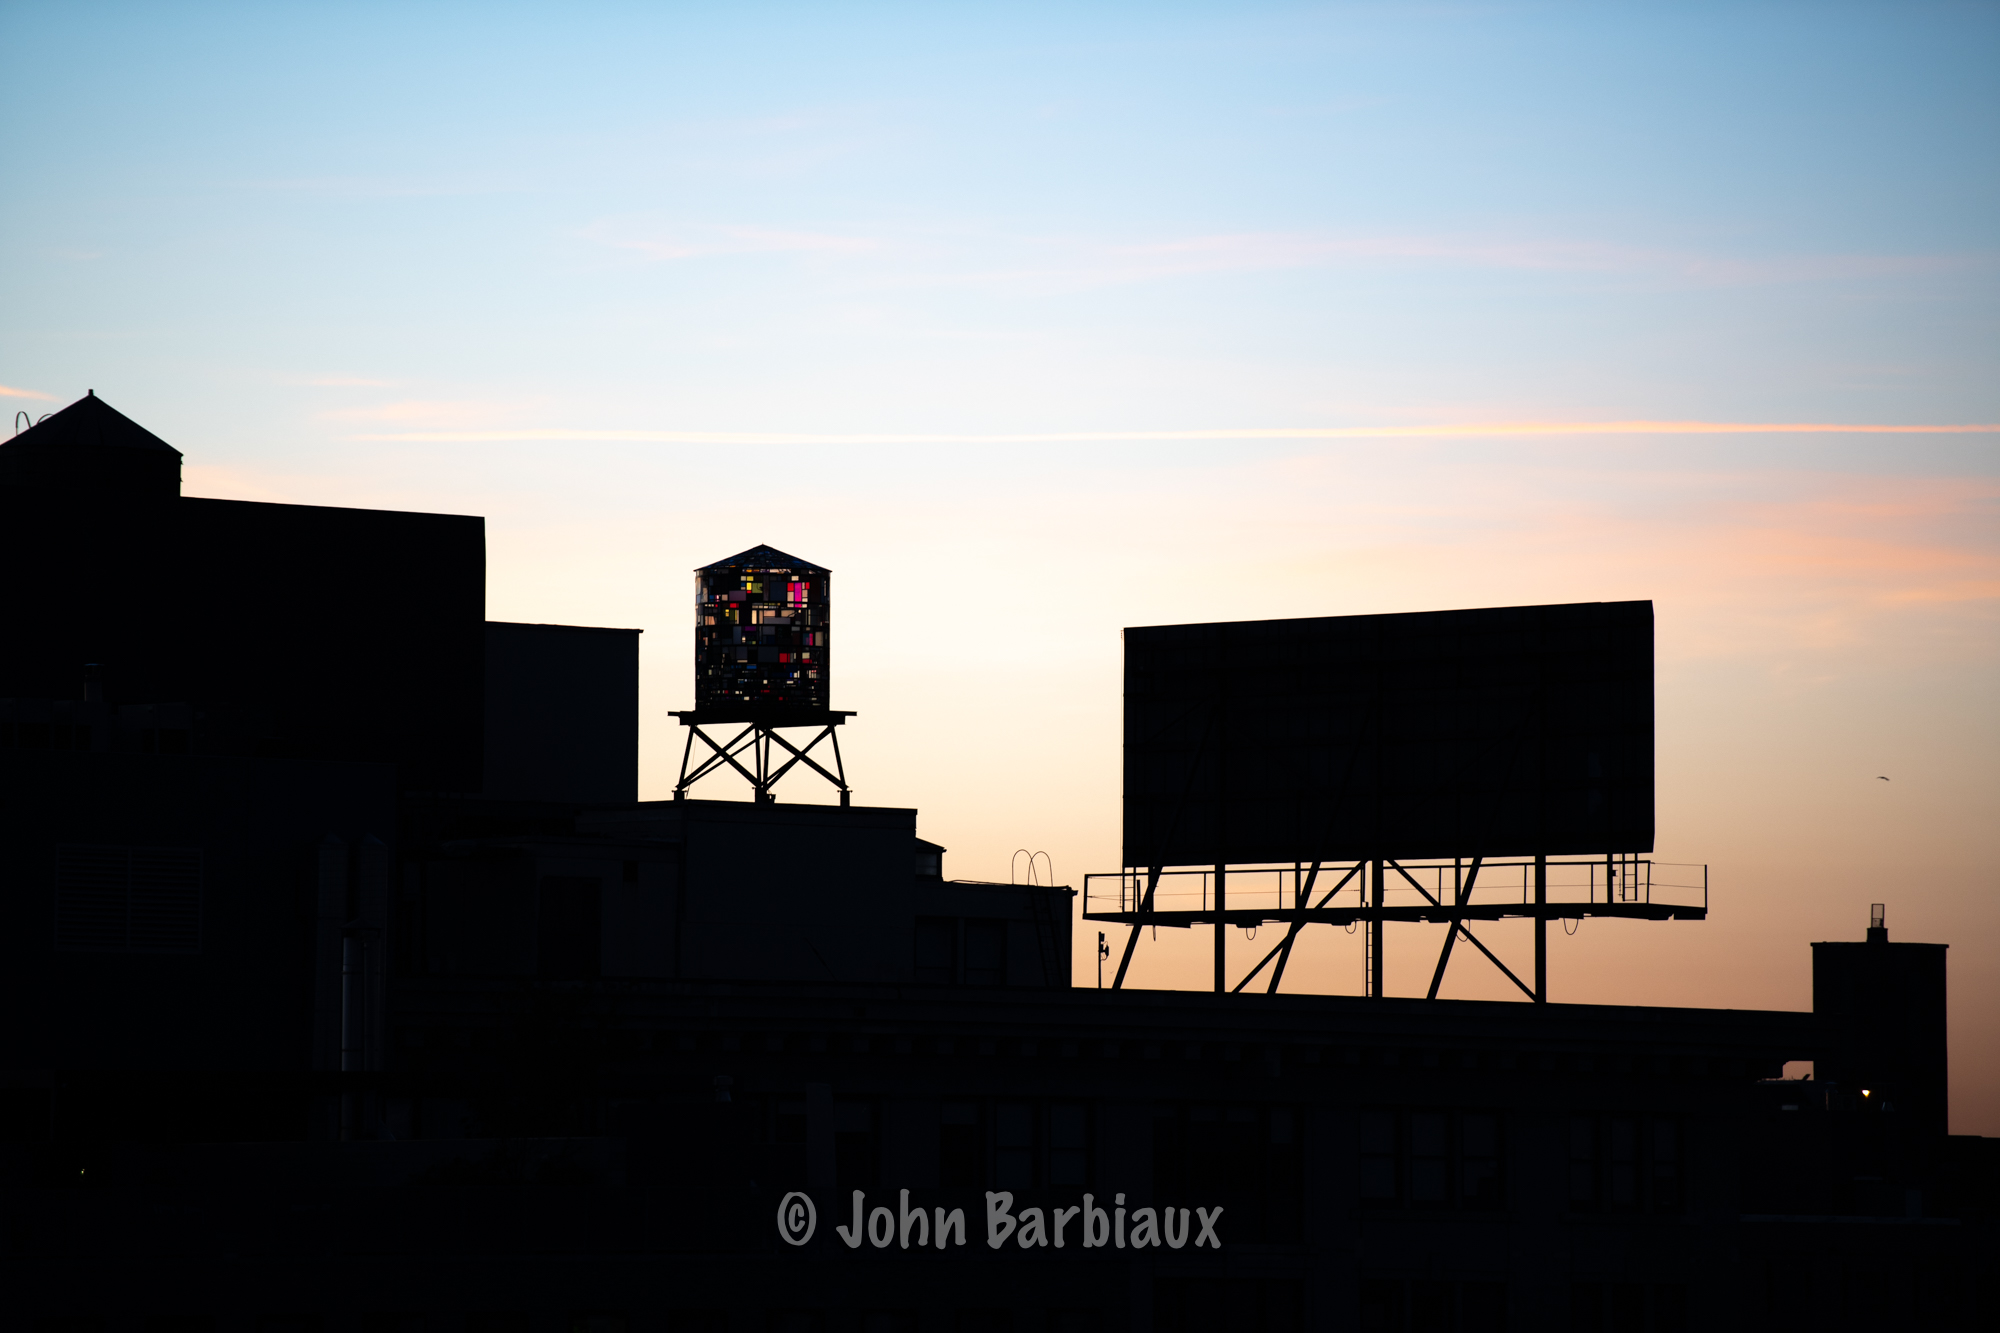 A silhouette of a colorful water tower built by artist Tom Fruin in Brooklyn New York at sunrise.